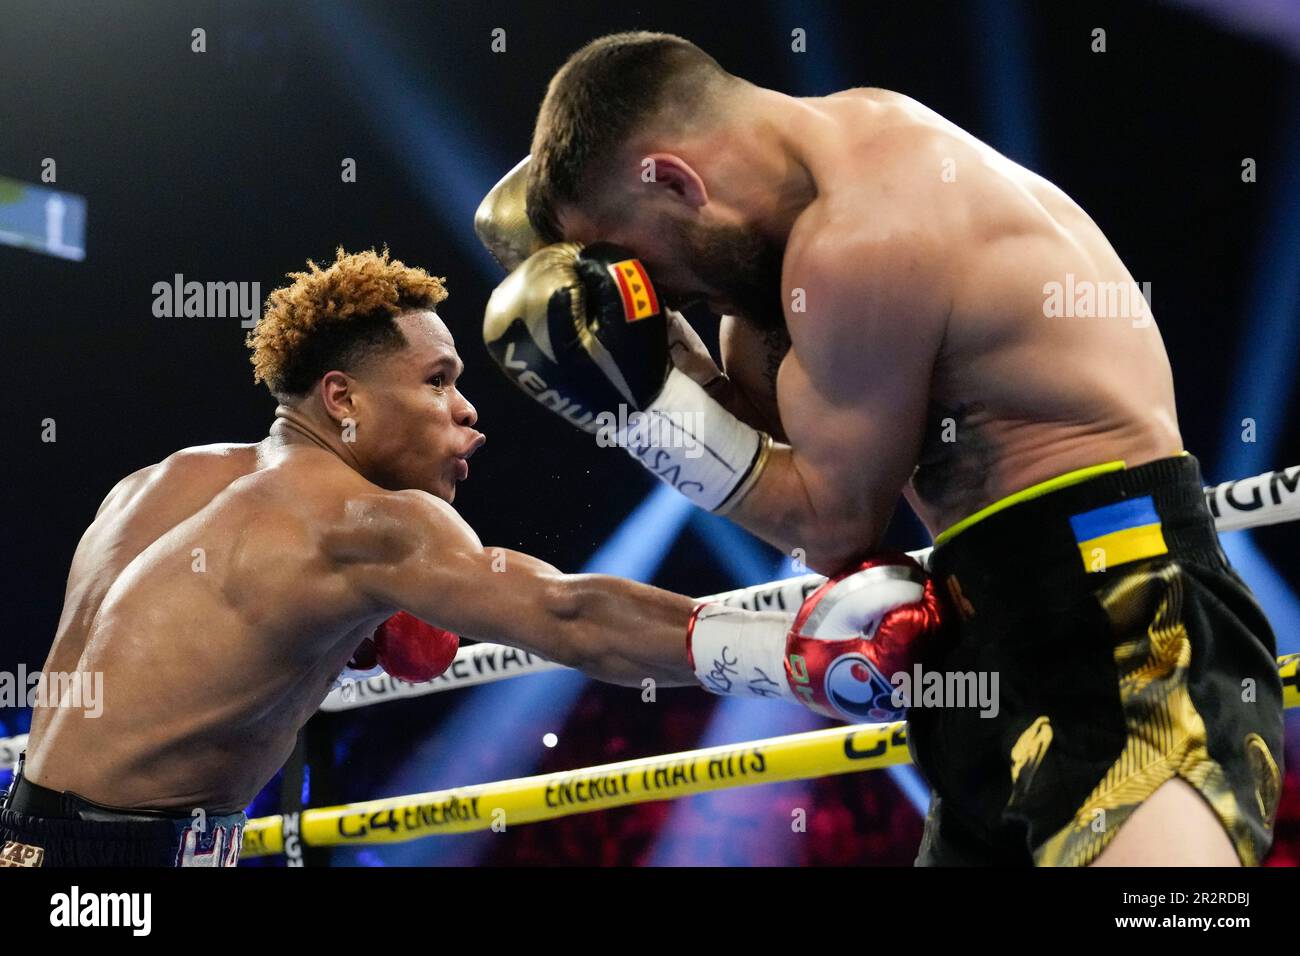 Devin Haney, left, fights Vasiliy Lomachenko in an undisputed lightweight championship boxing match Saturday, May 20, 2023, in Las Vegas